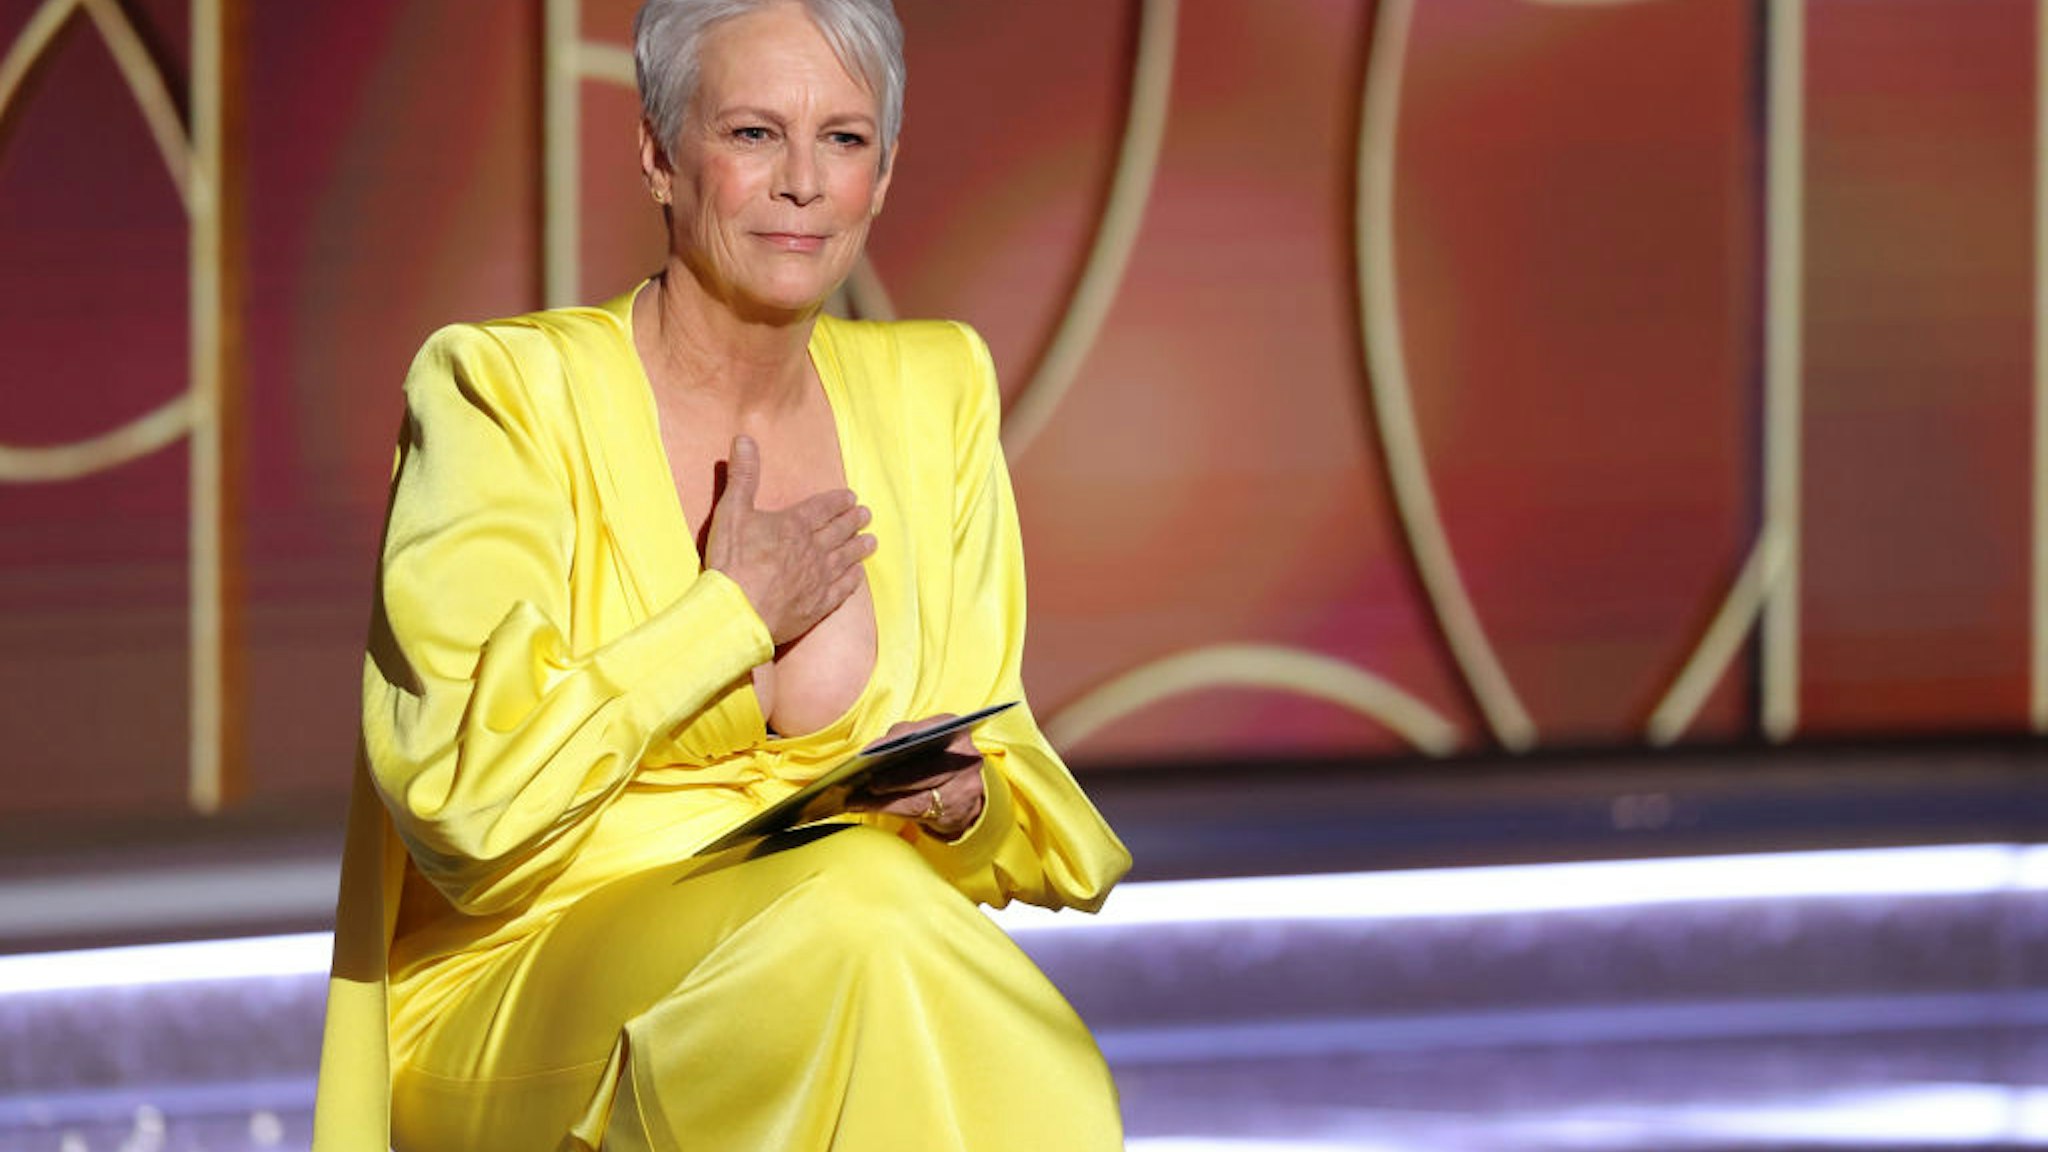 BEVERLY HILLS, CALIFORNIA: 78th Annual GOLDEN GLOBE AWARDS -- Pictured: Jamie Lee Curtis speaks onstage at the 78th Annual Golden Globe Awards held at The Beverly Hilton and broadcast on February 28, 2021 in Beverly Hills, California.